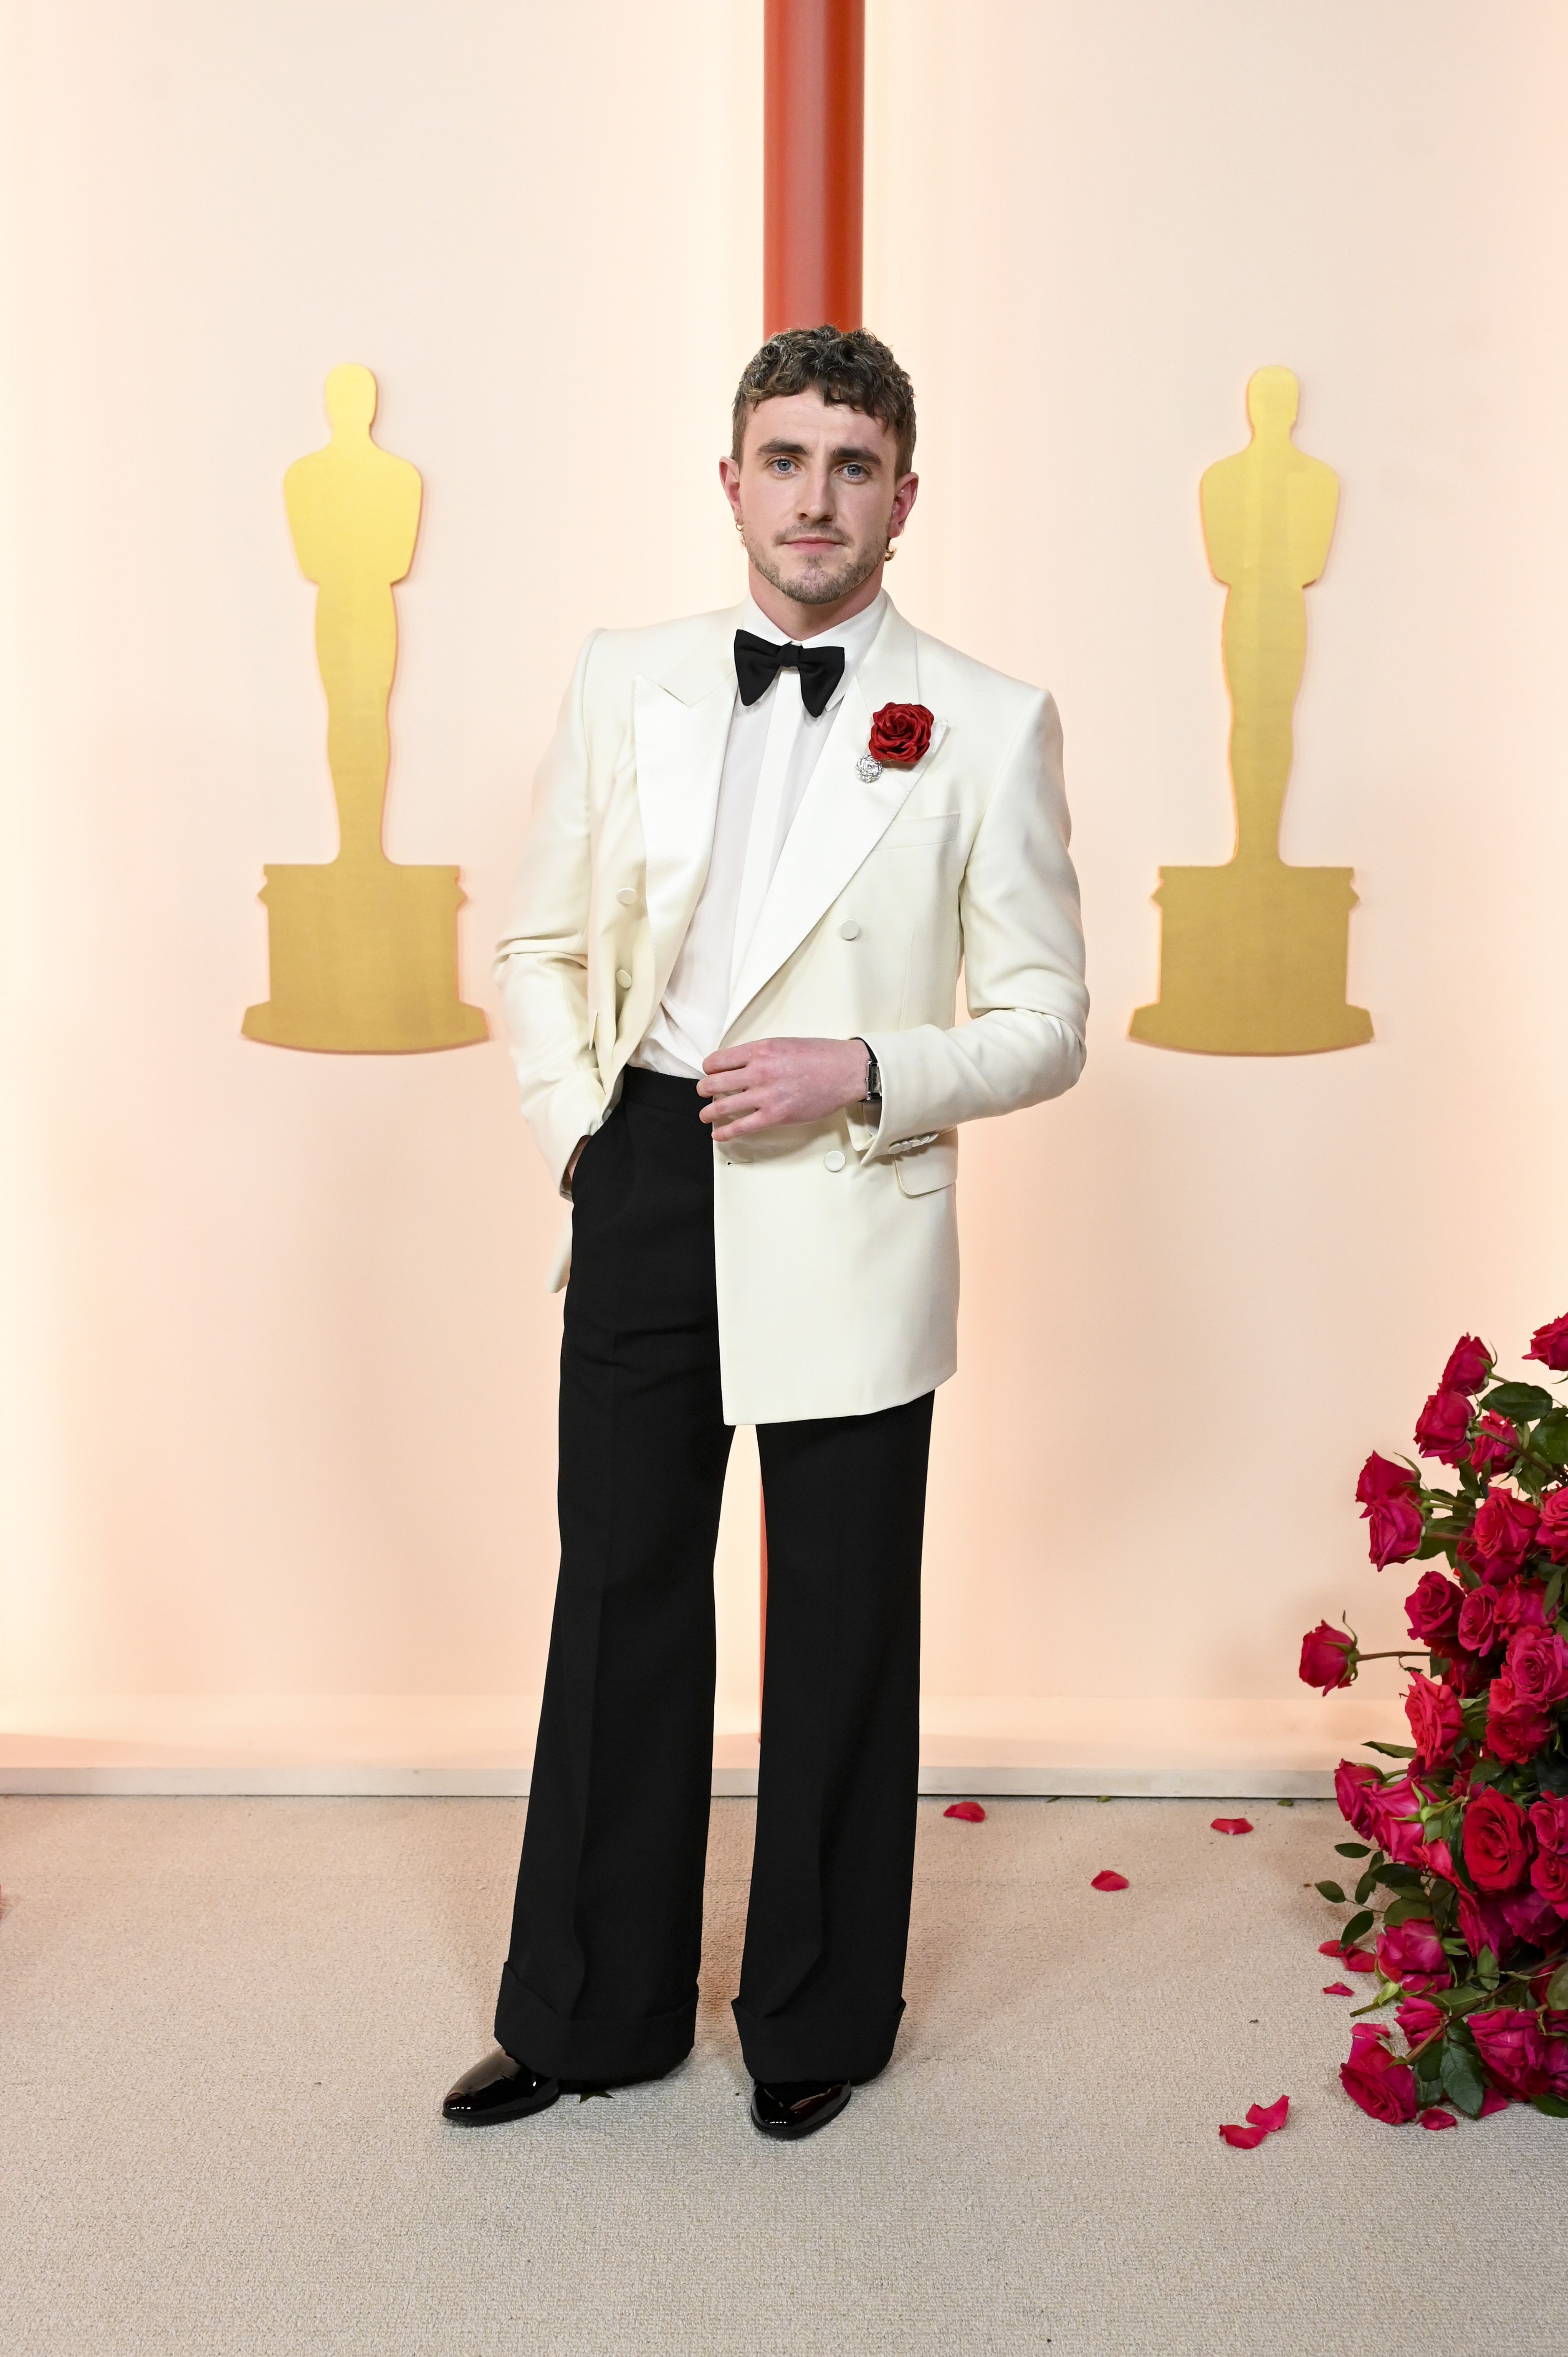 The Most Daring Looks Men Wore to the 2022 Oscars — Photos